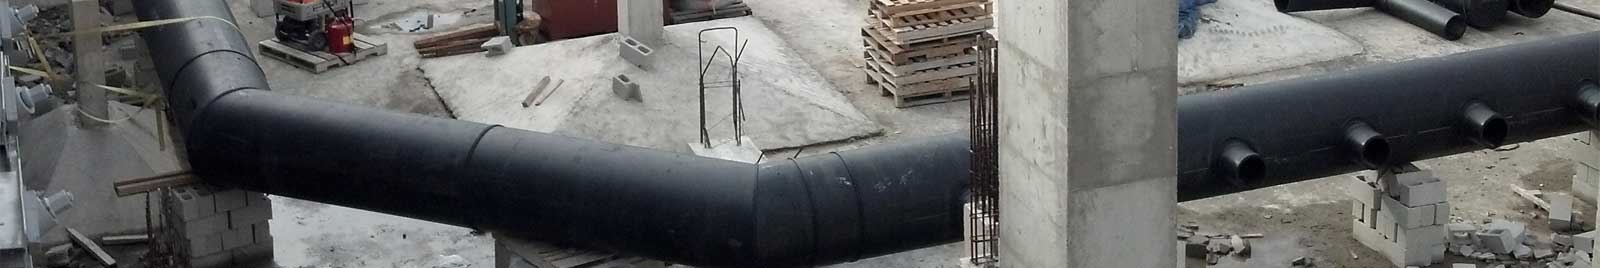 HDPE Pipe Manufacturers